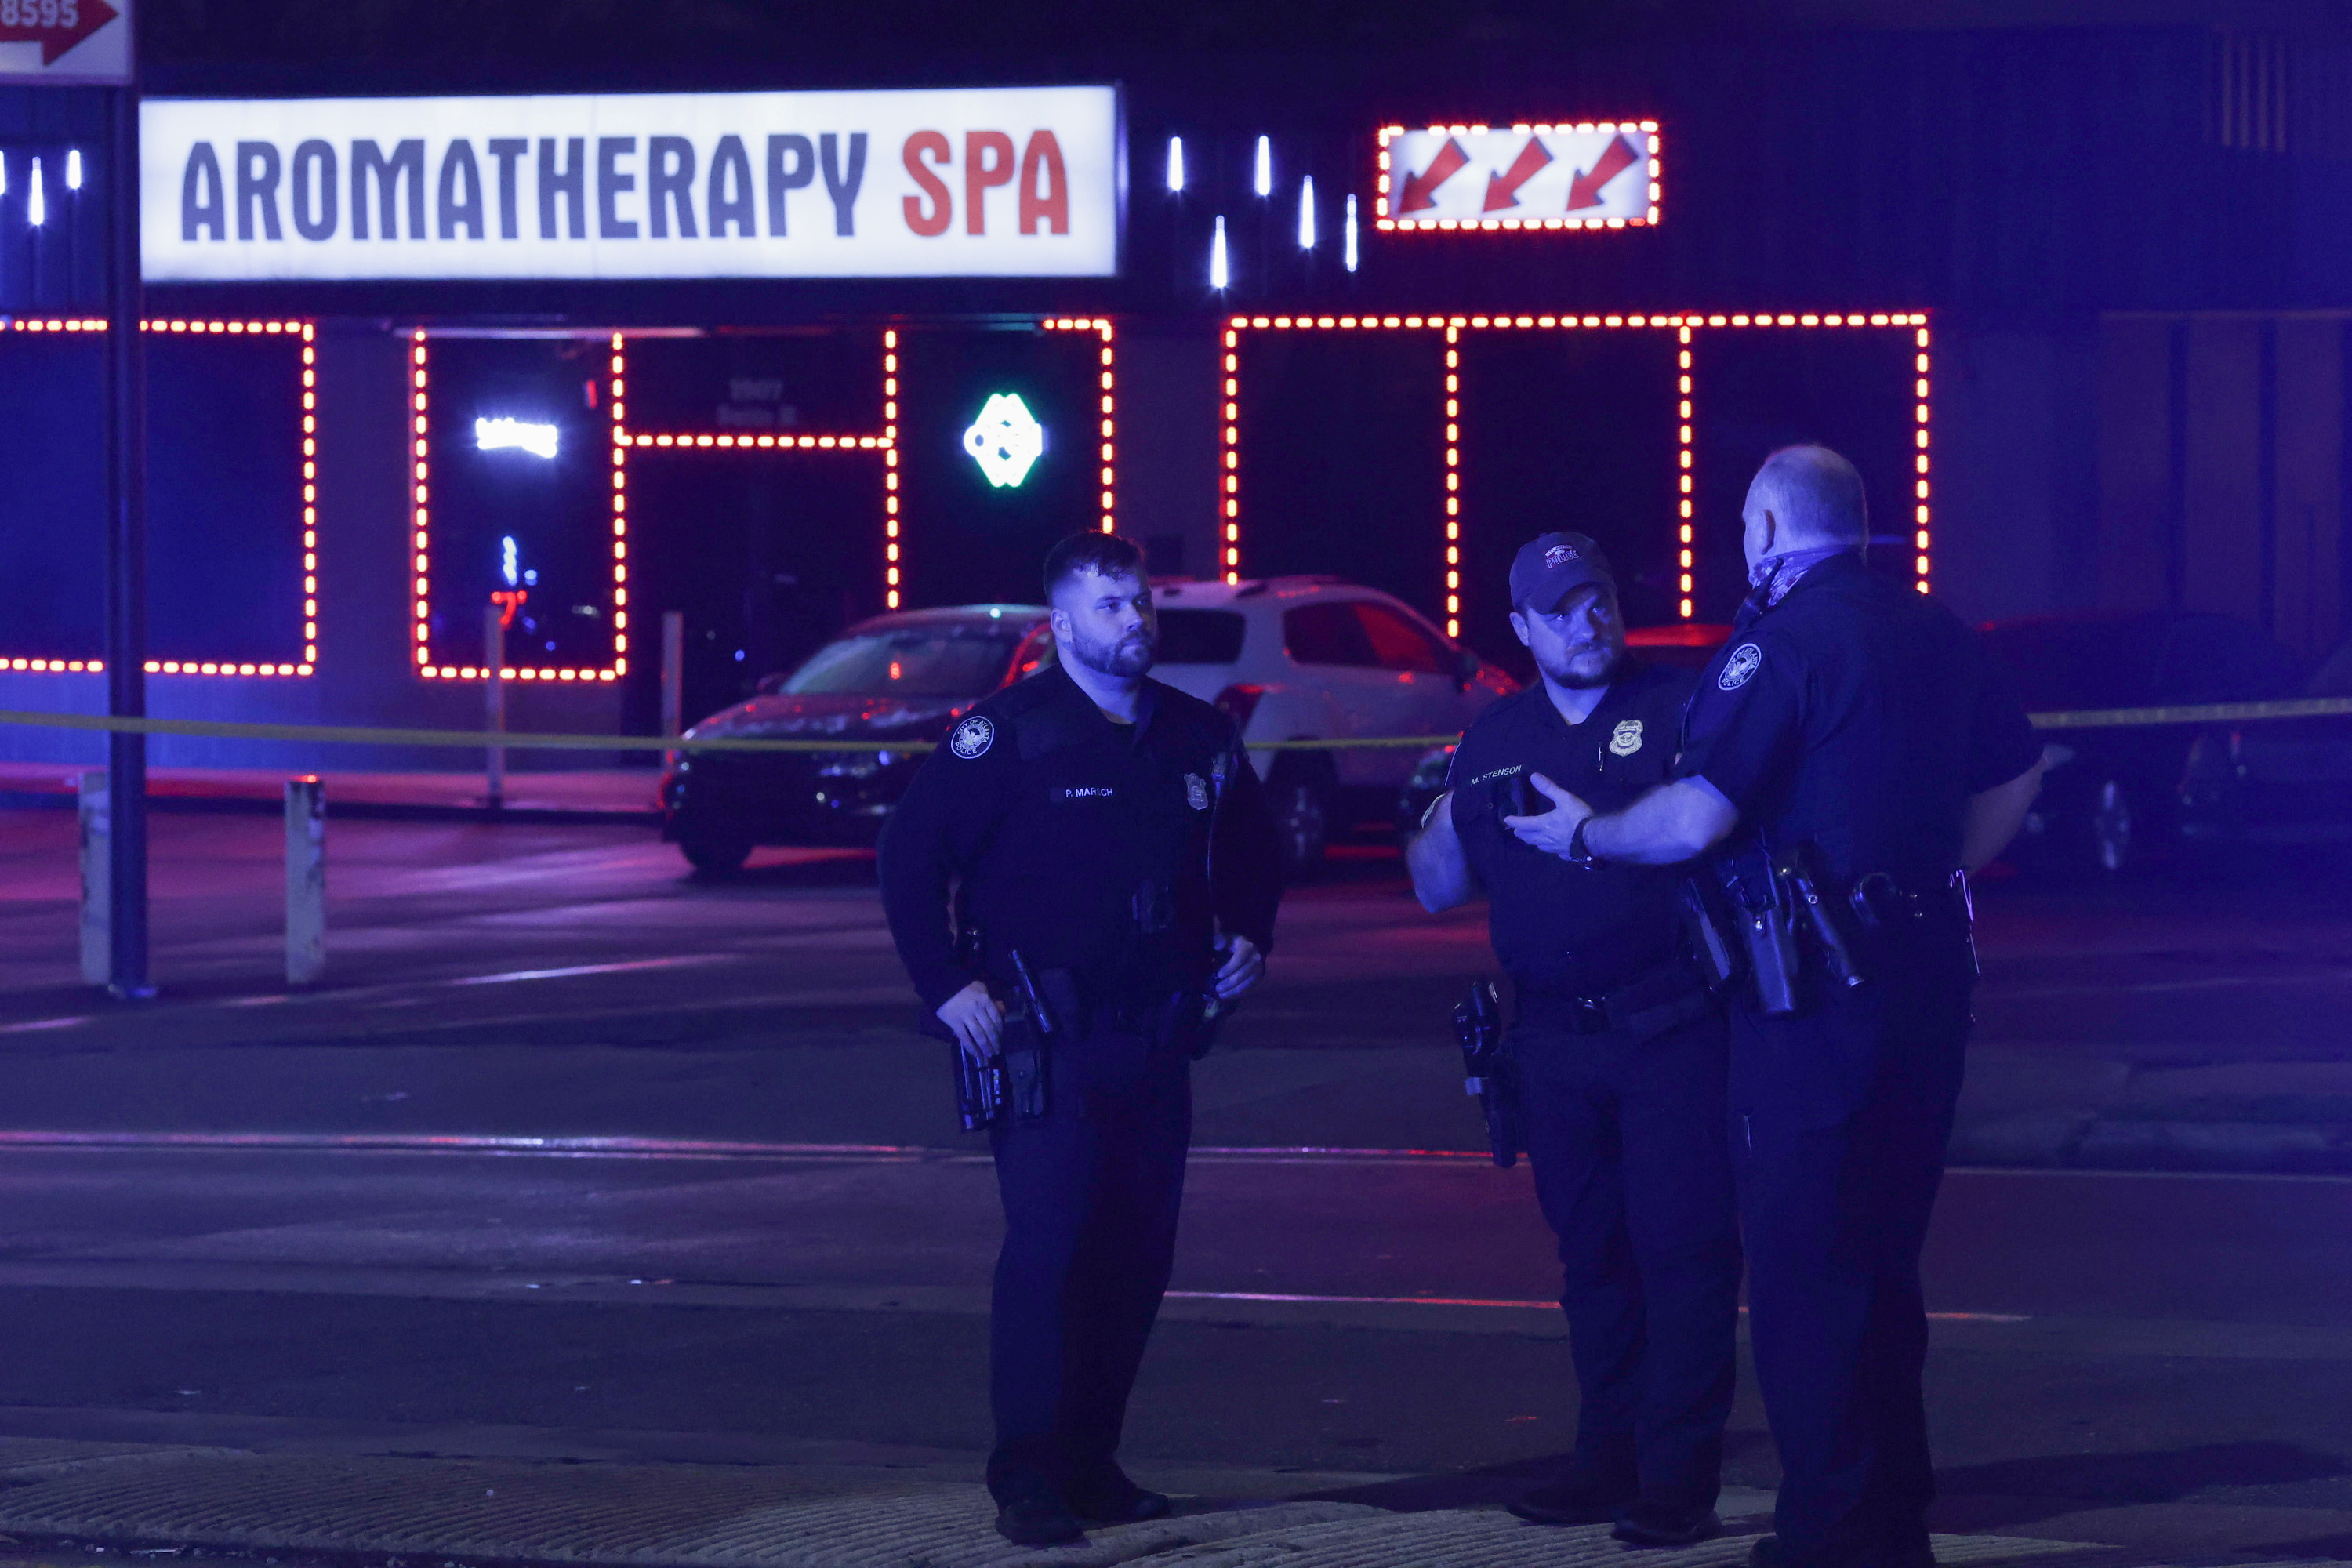 City of Atlanta police officers are seen outside of Gold Spa after deadly shootings in the Atlanta area